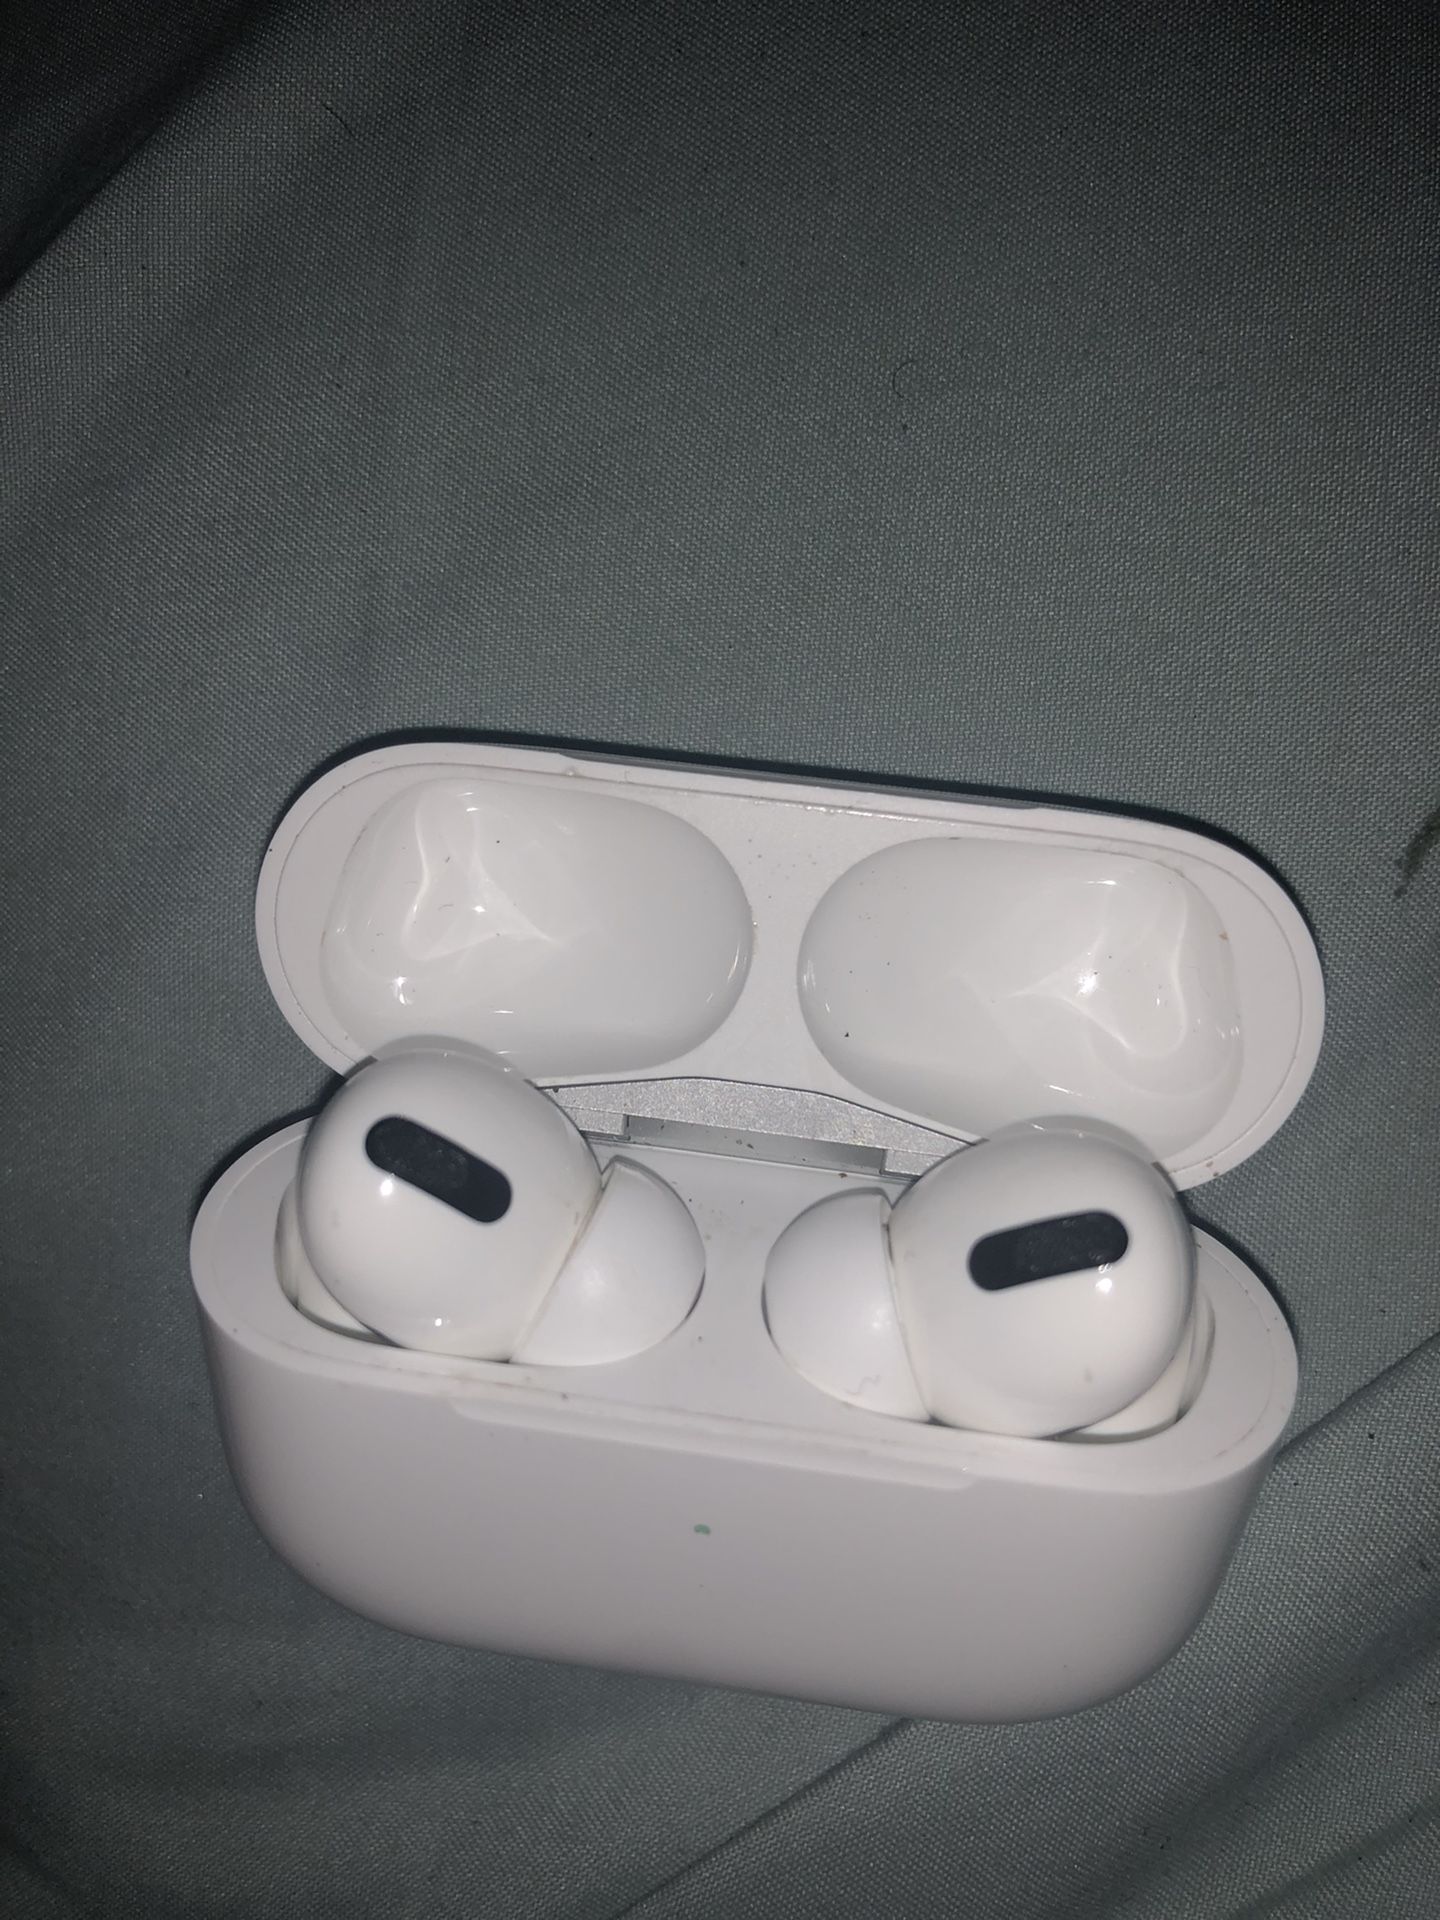 AIRPOD PROS WITH CHARGING CASE